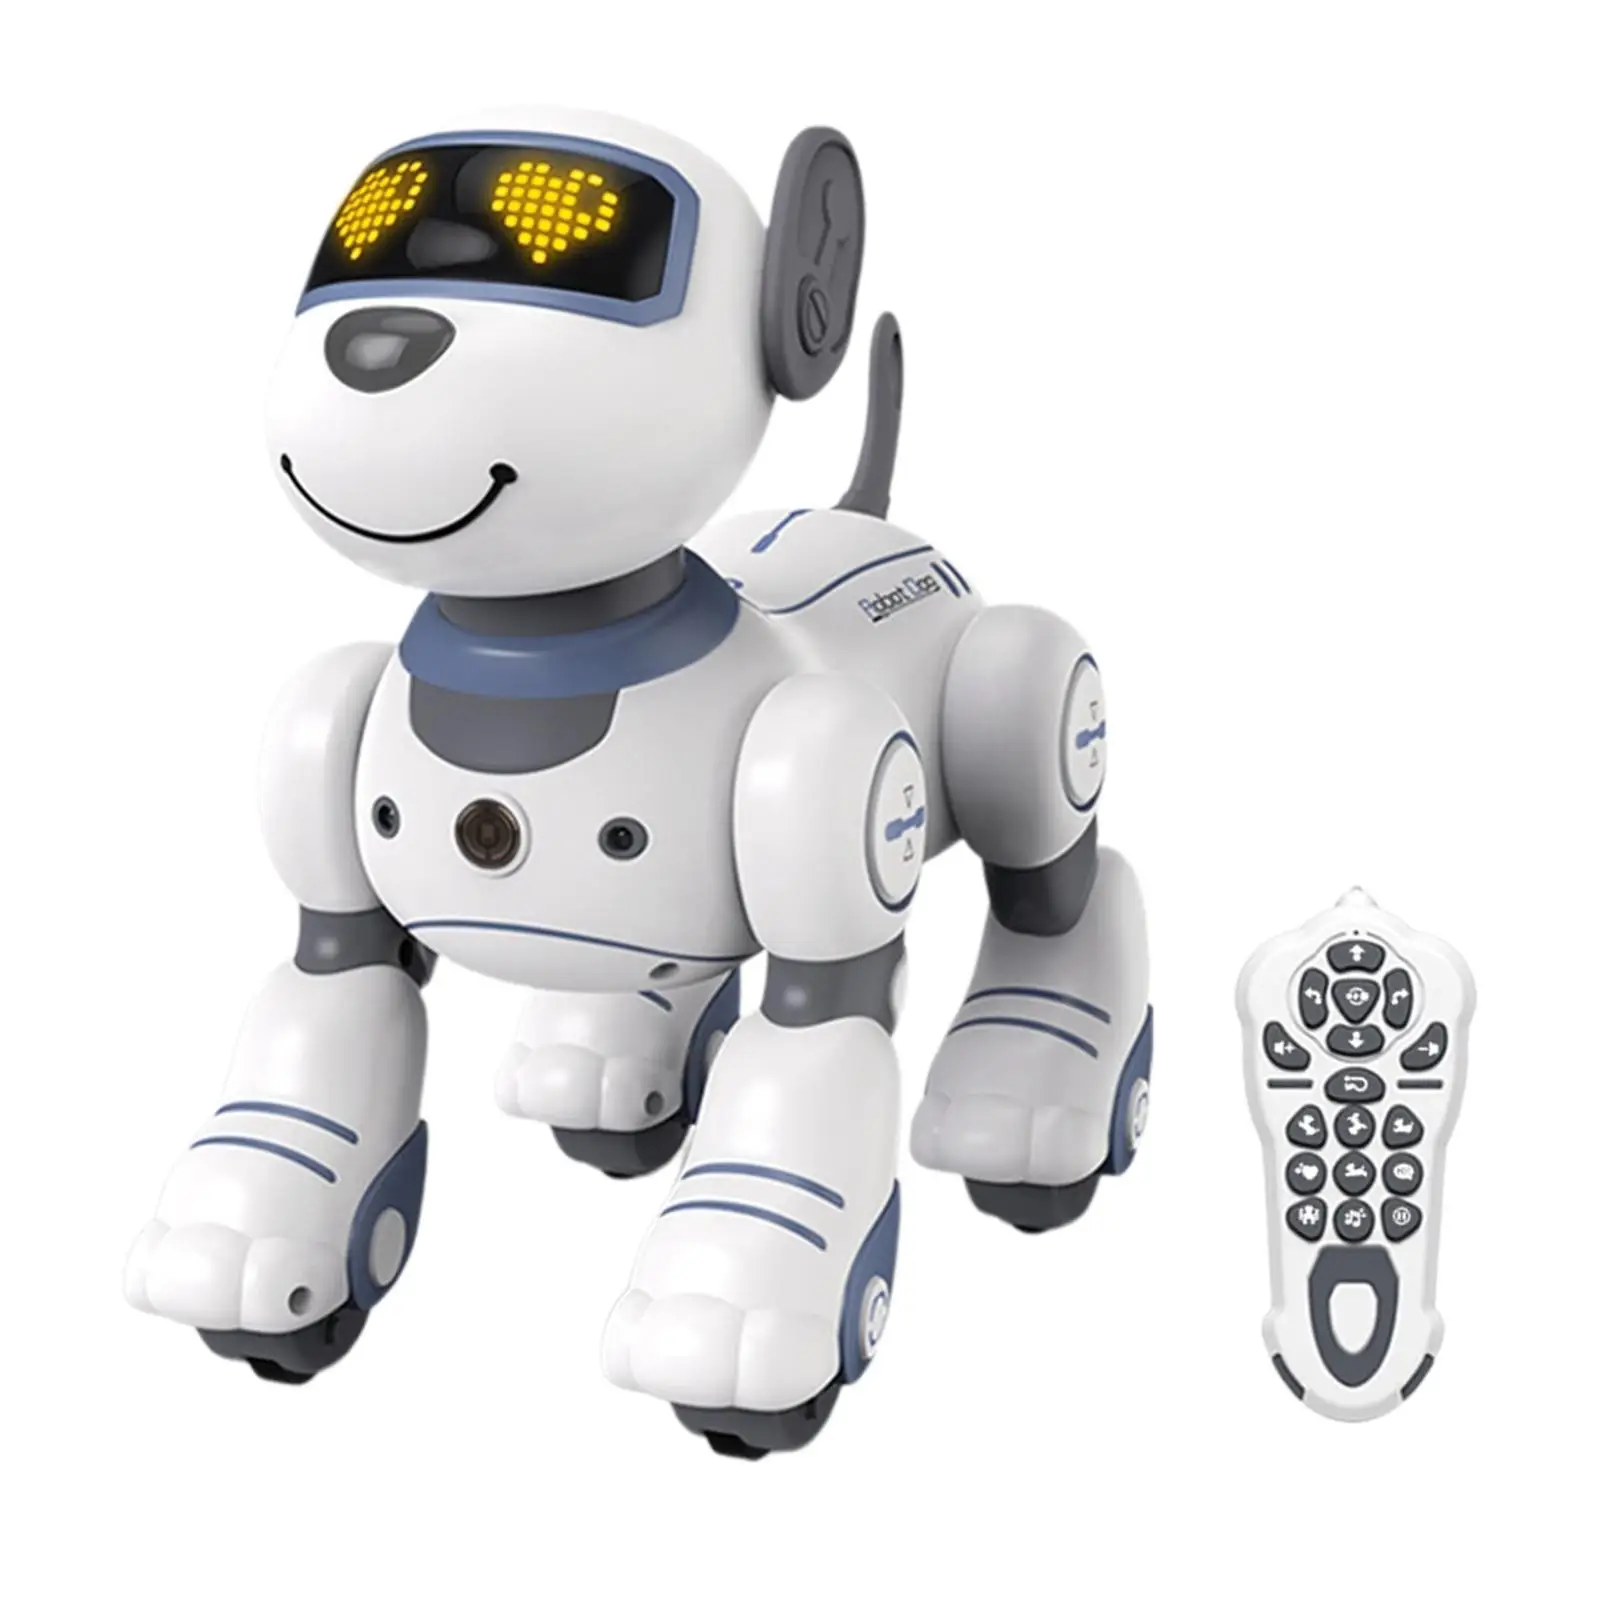 Cute Remote Control Robot Dog Toy Toys Electronic Toys Appease Toy Robotic Pet Toy Programable for Boys Girls Children`s